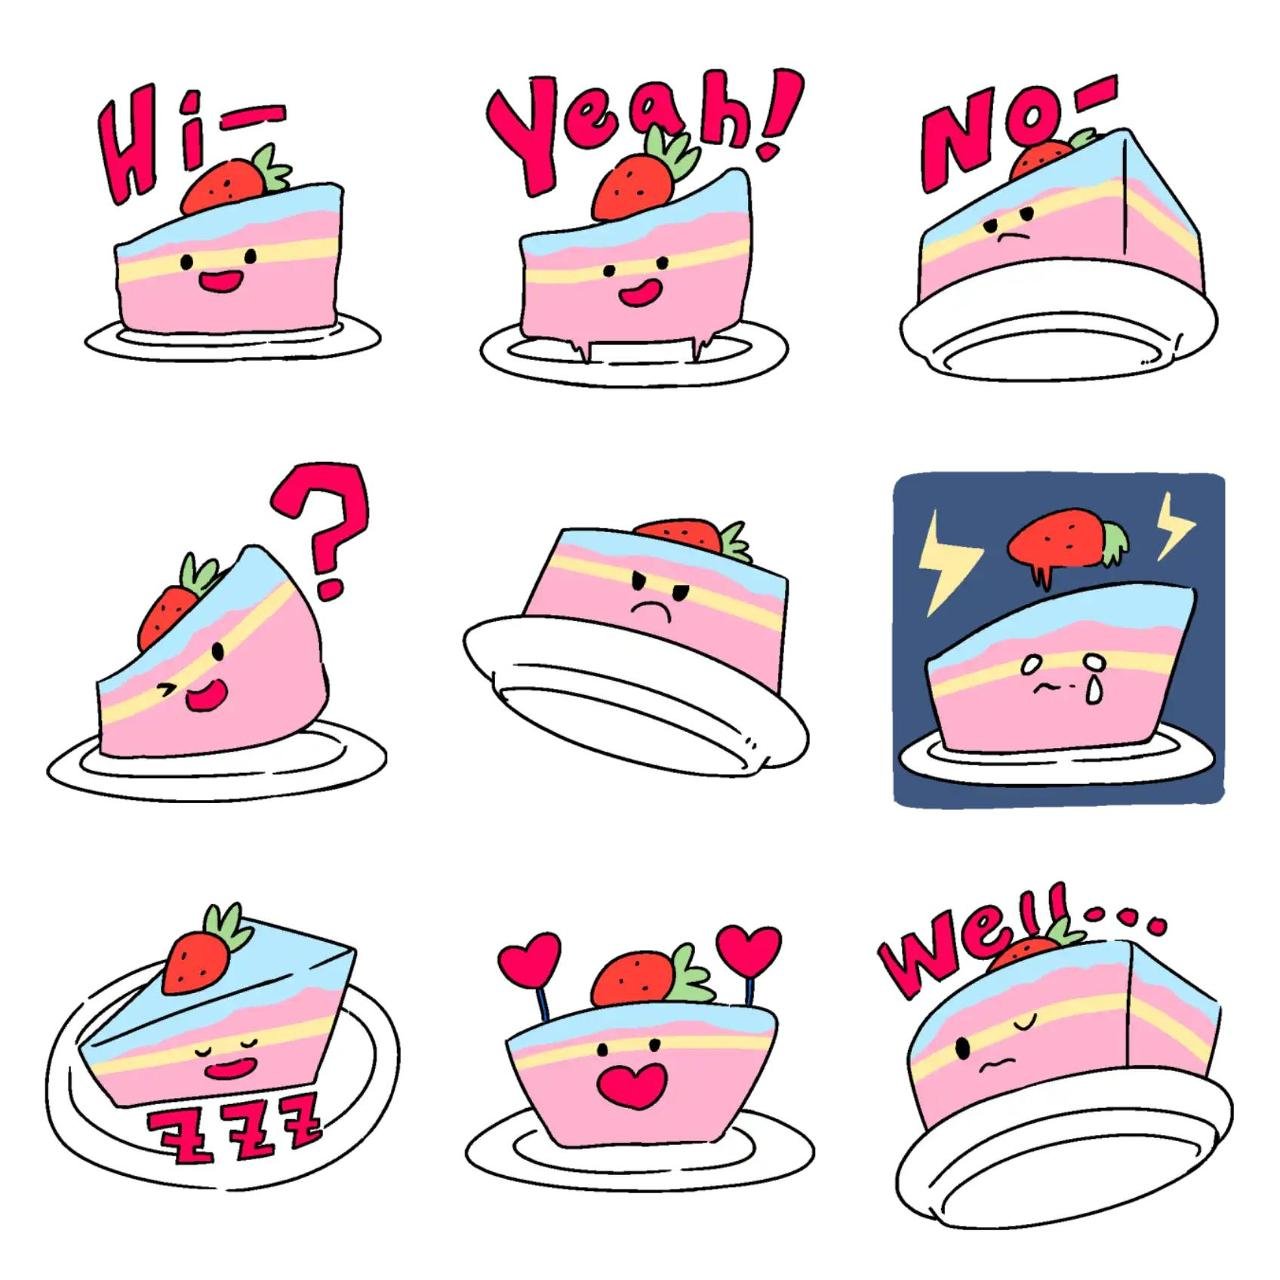 A piece of cake Animation/Cartoon,Food/Drink sticker pack for Whatsapp, Telegram, Signal, and others chatting and message apps